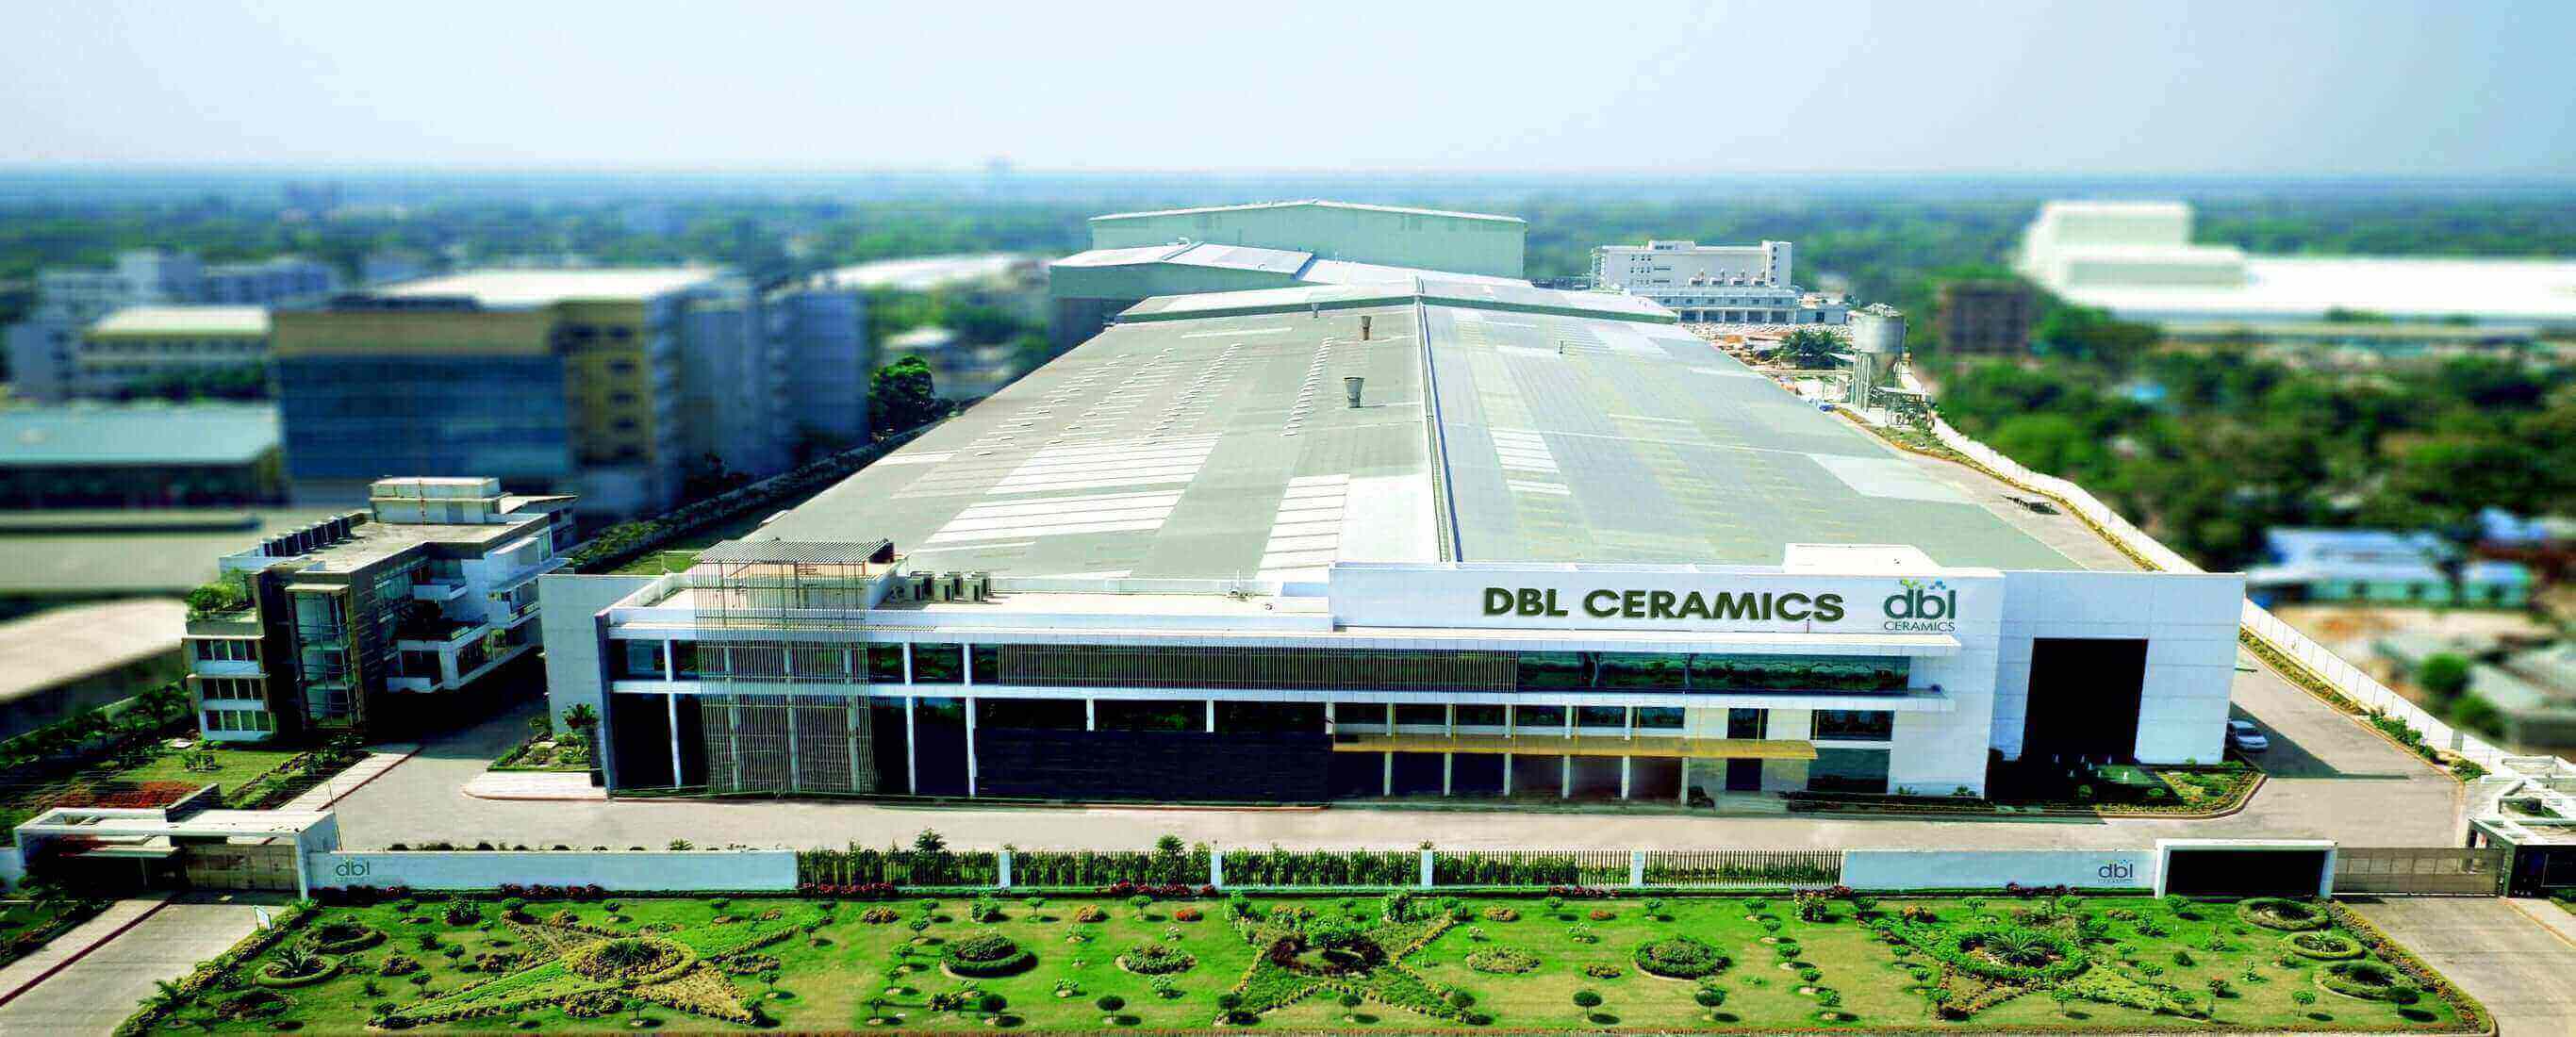 The One of the Largest Tiles Factories in Bangladesh-DBLCermaics